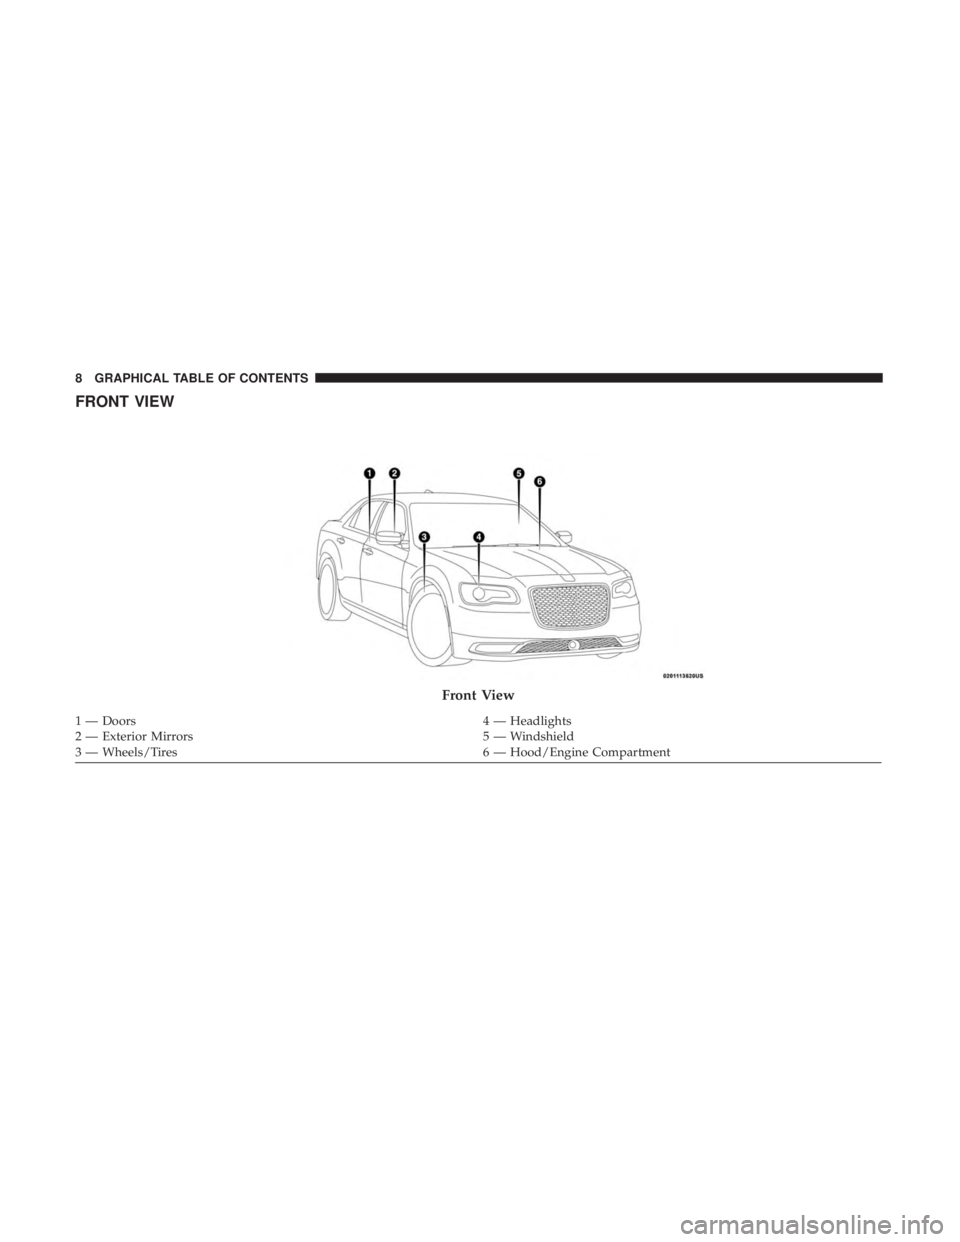 CHRYSLER 300 2018  Owners Manual FRONT VIEW
Front View
1 — Doors4 — Headlights
2 — Exterior Mirrors 5 — Windshield
3 — Wheels/Tires 6 — Hood/Engine Compartment
8 GRAPHICAL TABLE OF CONTENTS 